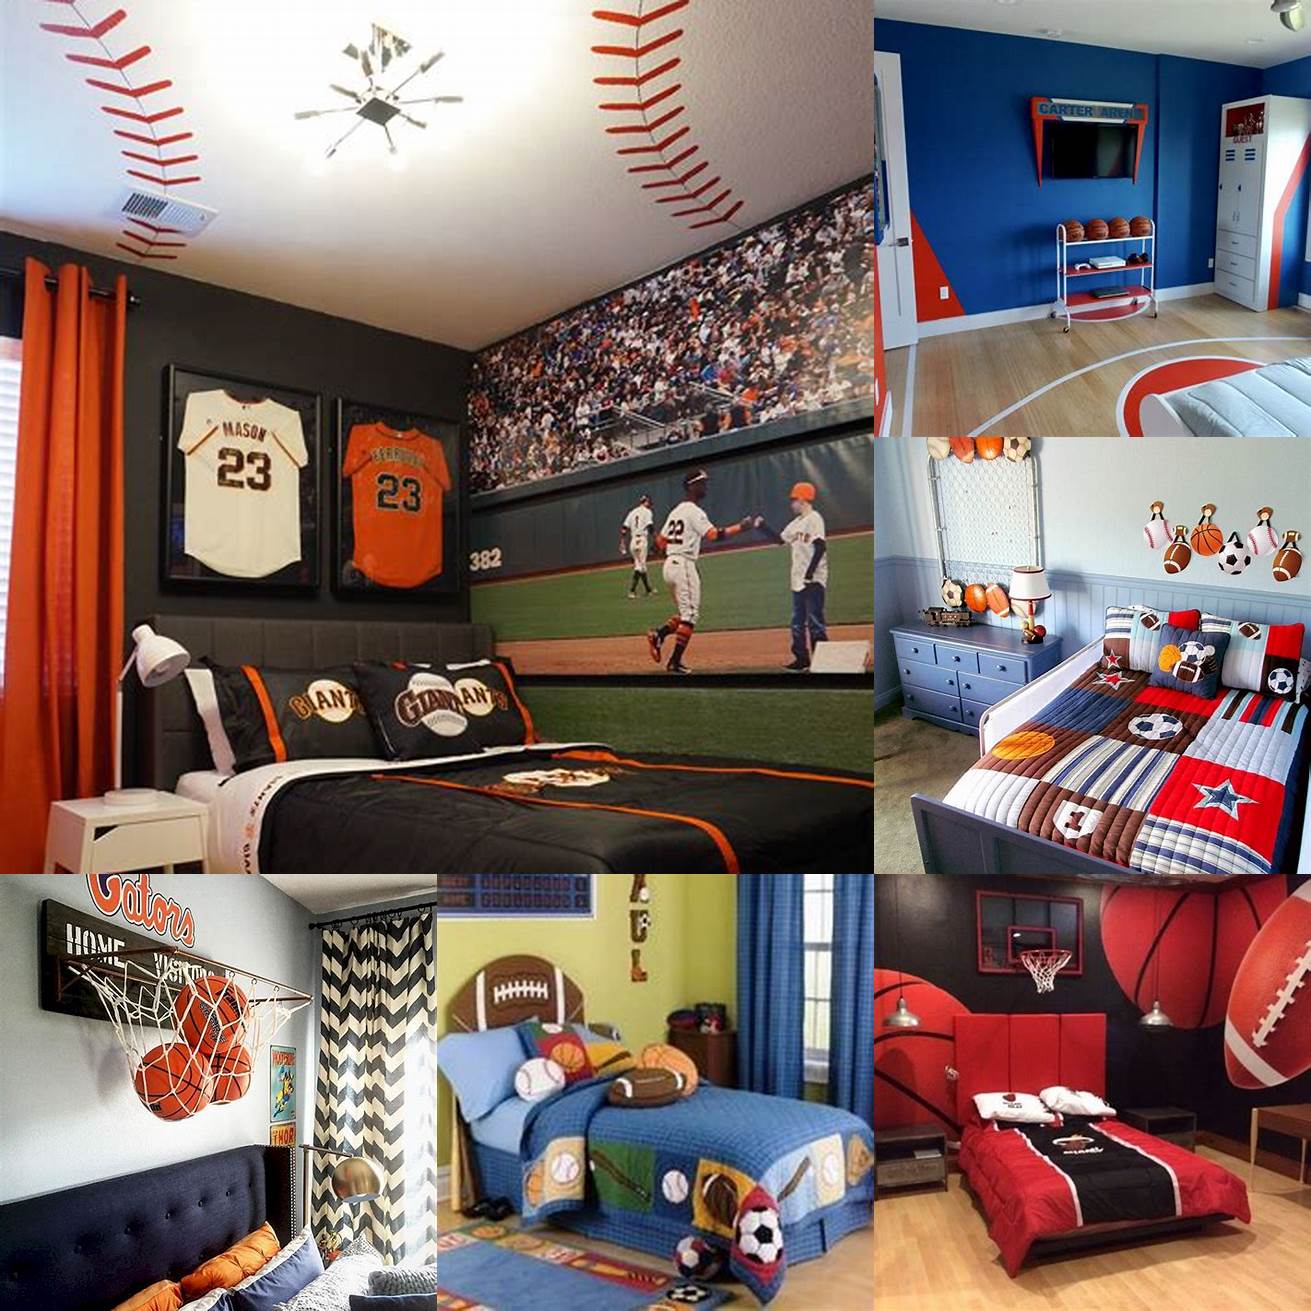 A sports-themed bedroom is perfect for boys who love sports You can use sports equipment as decor such as hanging a basketball hoop on the wall